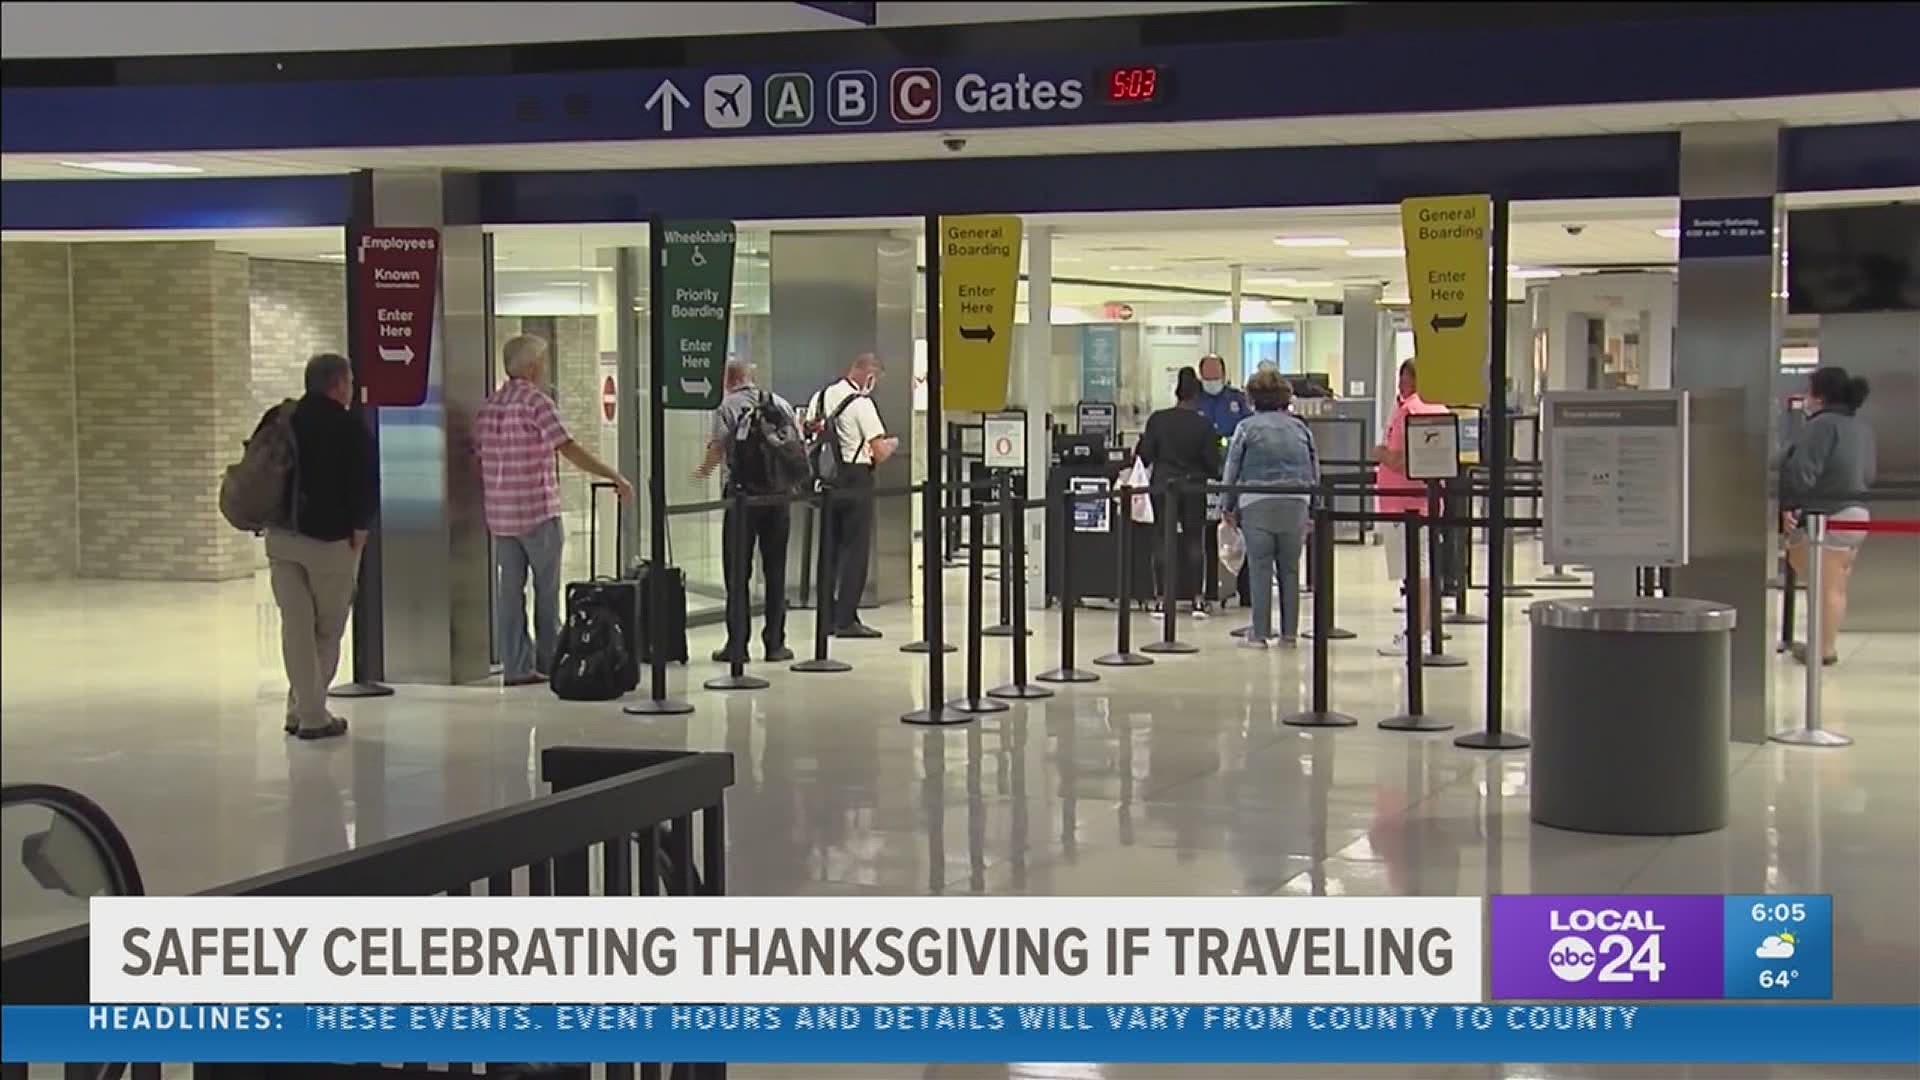 Whether flying or driving, here's a look at how to have a safe holiday trip.